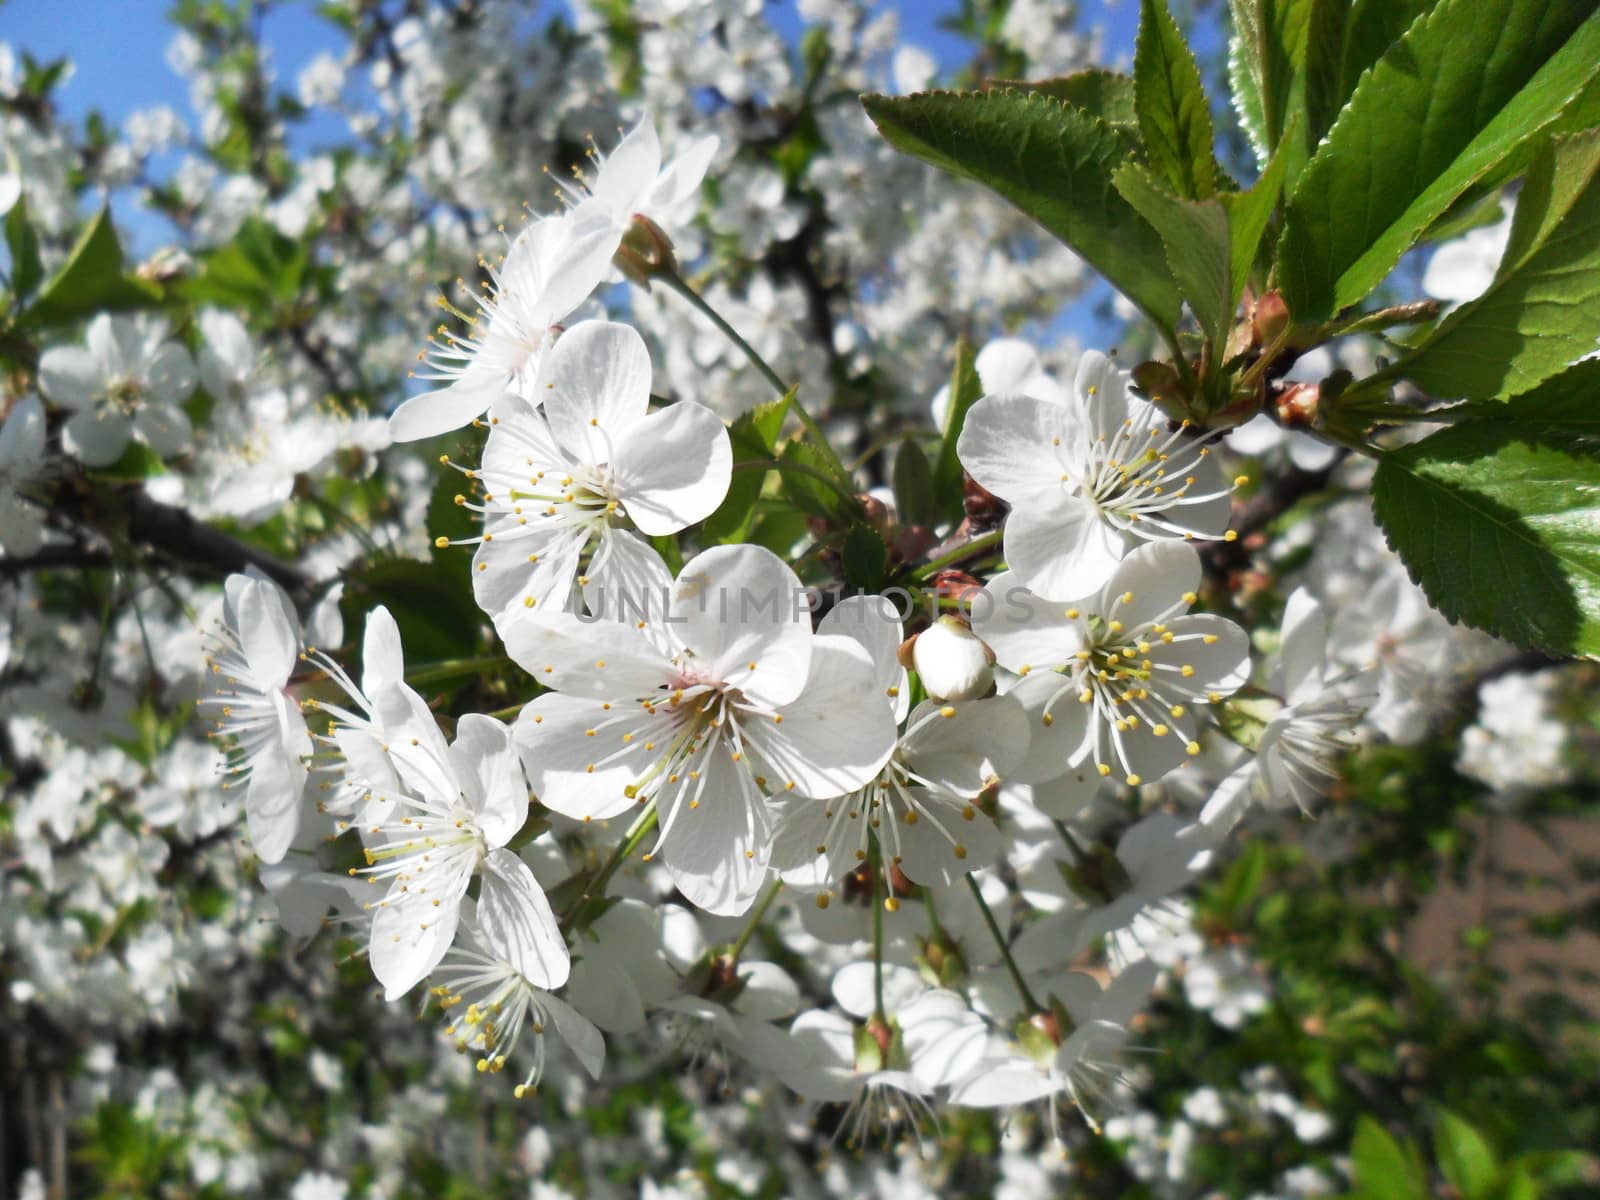 White flowers of apple trees on a
background of green leaves